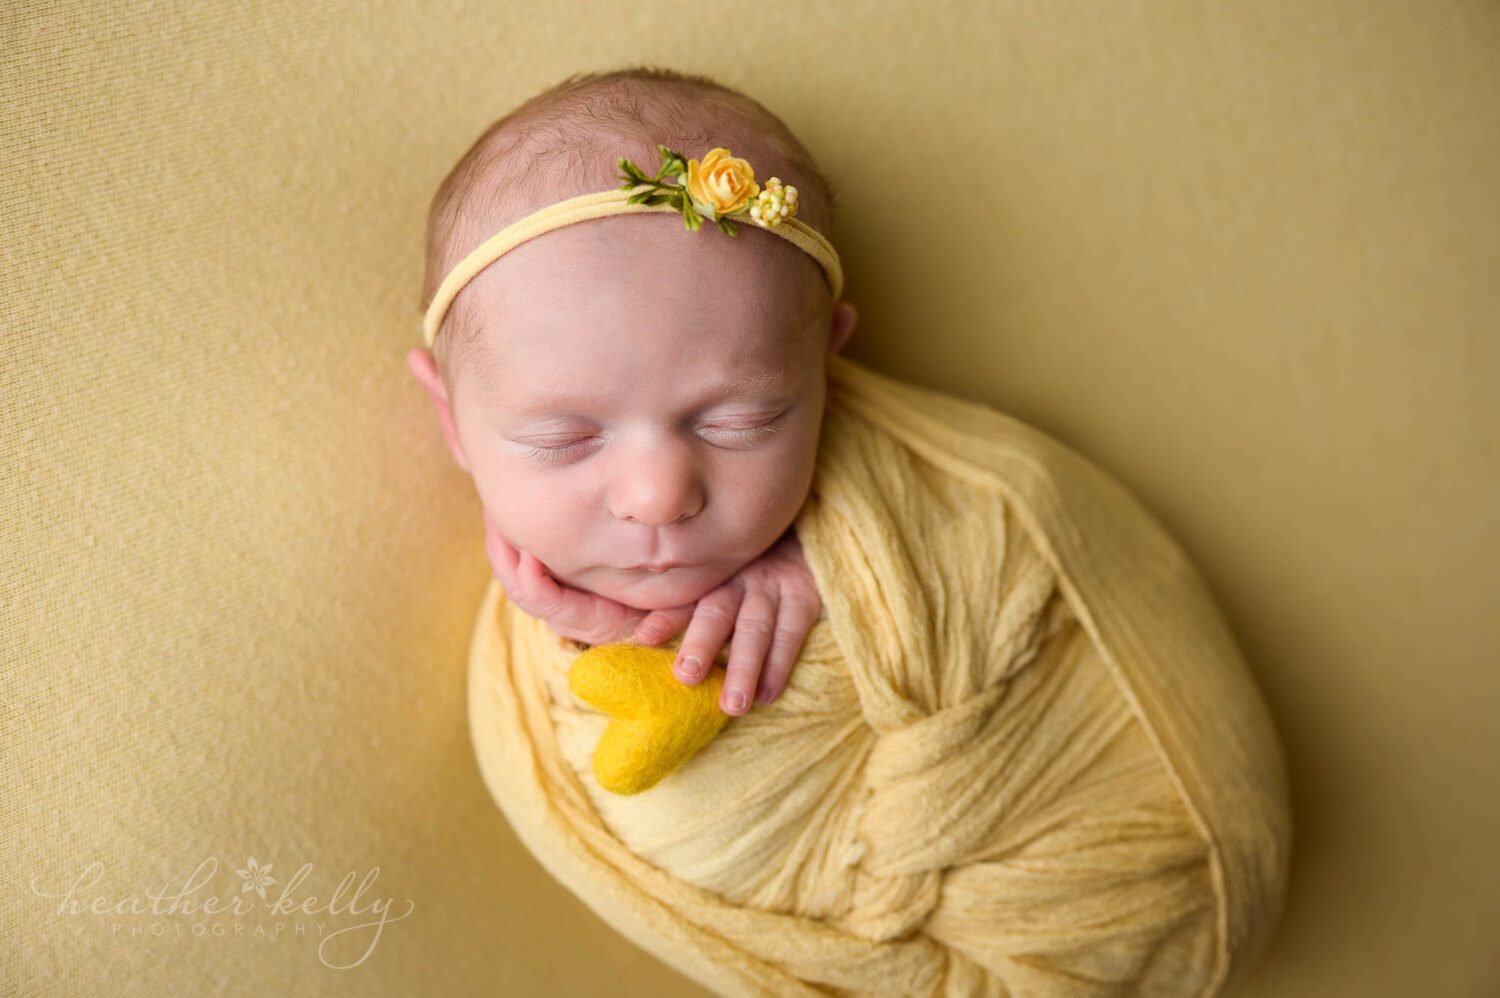 wrapped in yellow, and holding a small yellow felted heart. A sleeping newborn is posed on yellow. 